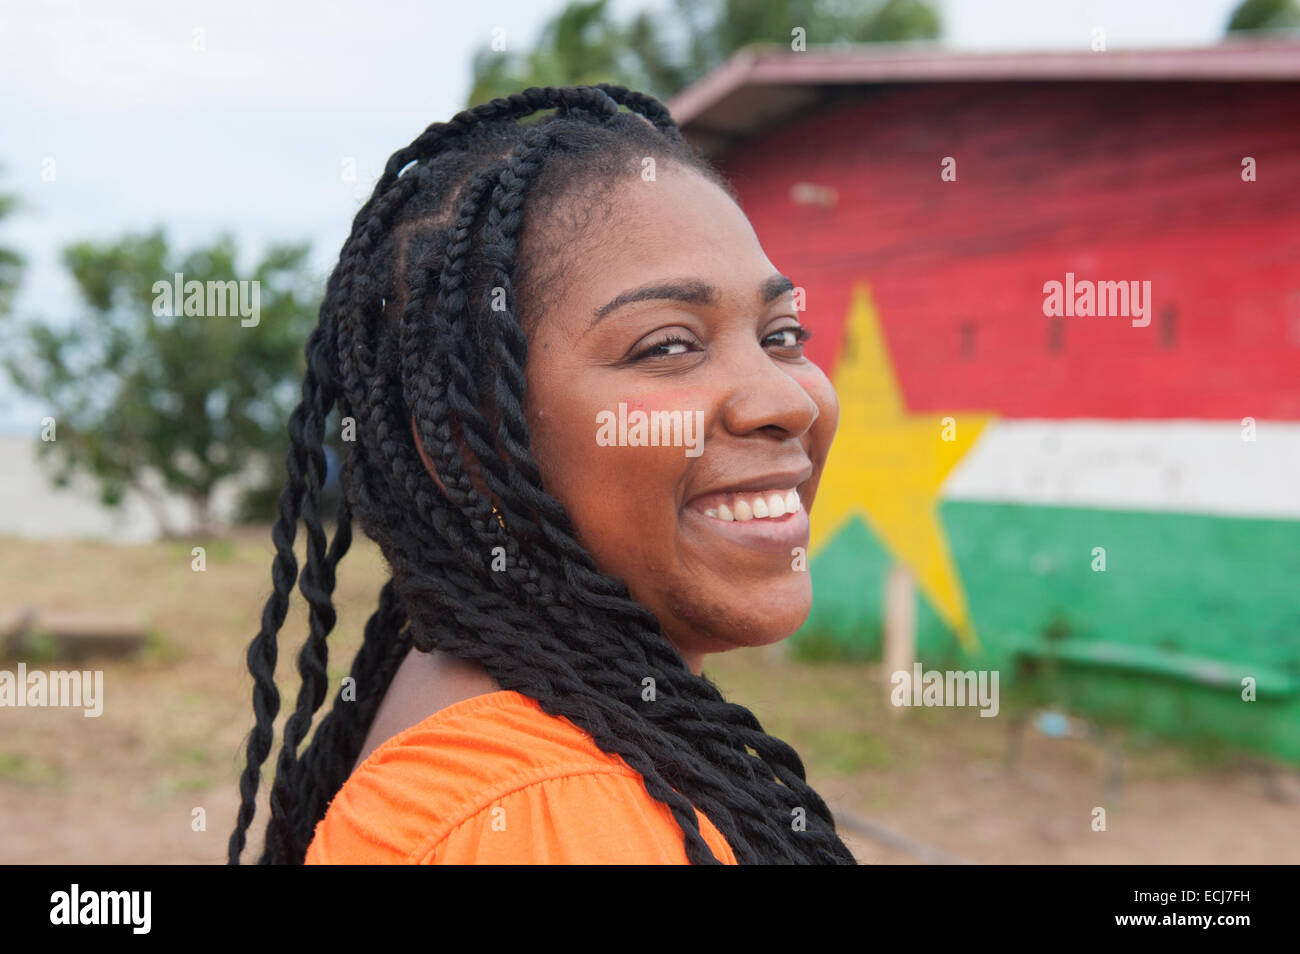 Arlette, a Surinamese girl with dreadlocks, in front of the Surinamese flag painted on a wall at Christiaankondre, Galibi Stock Photo